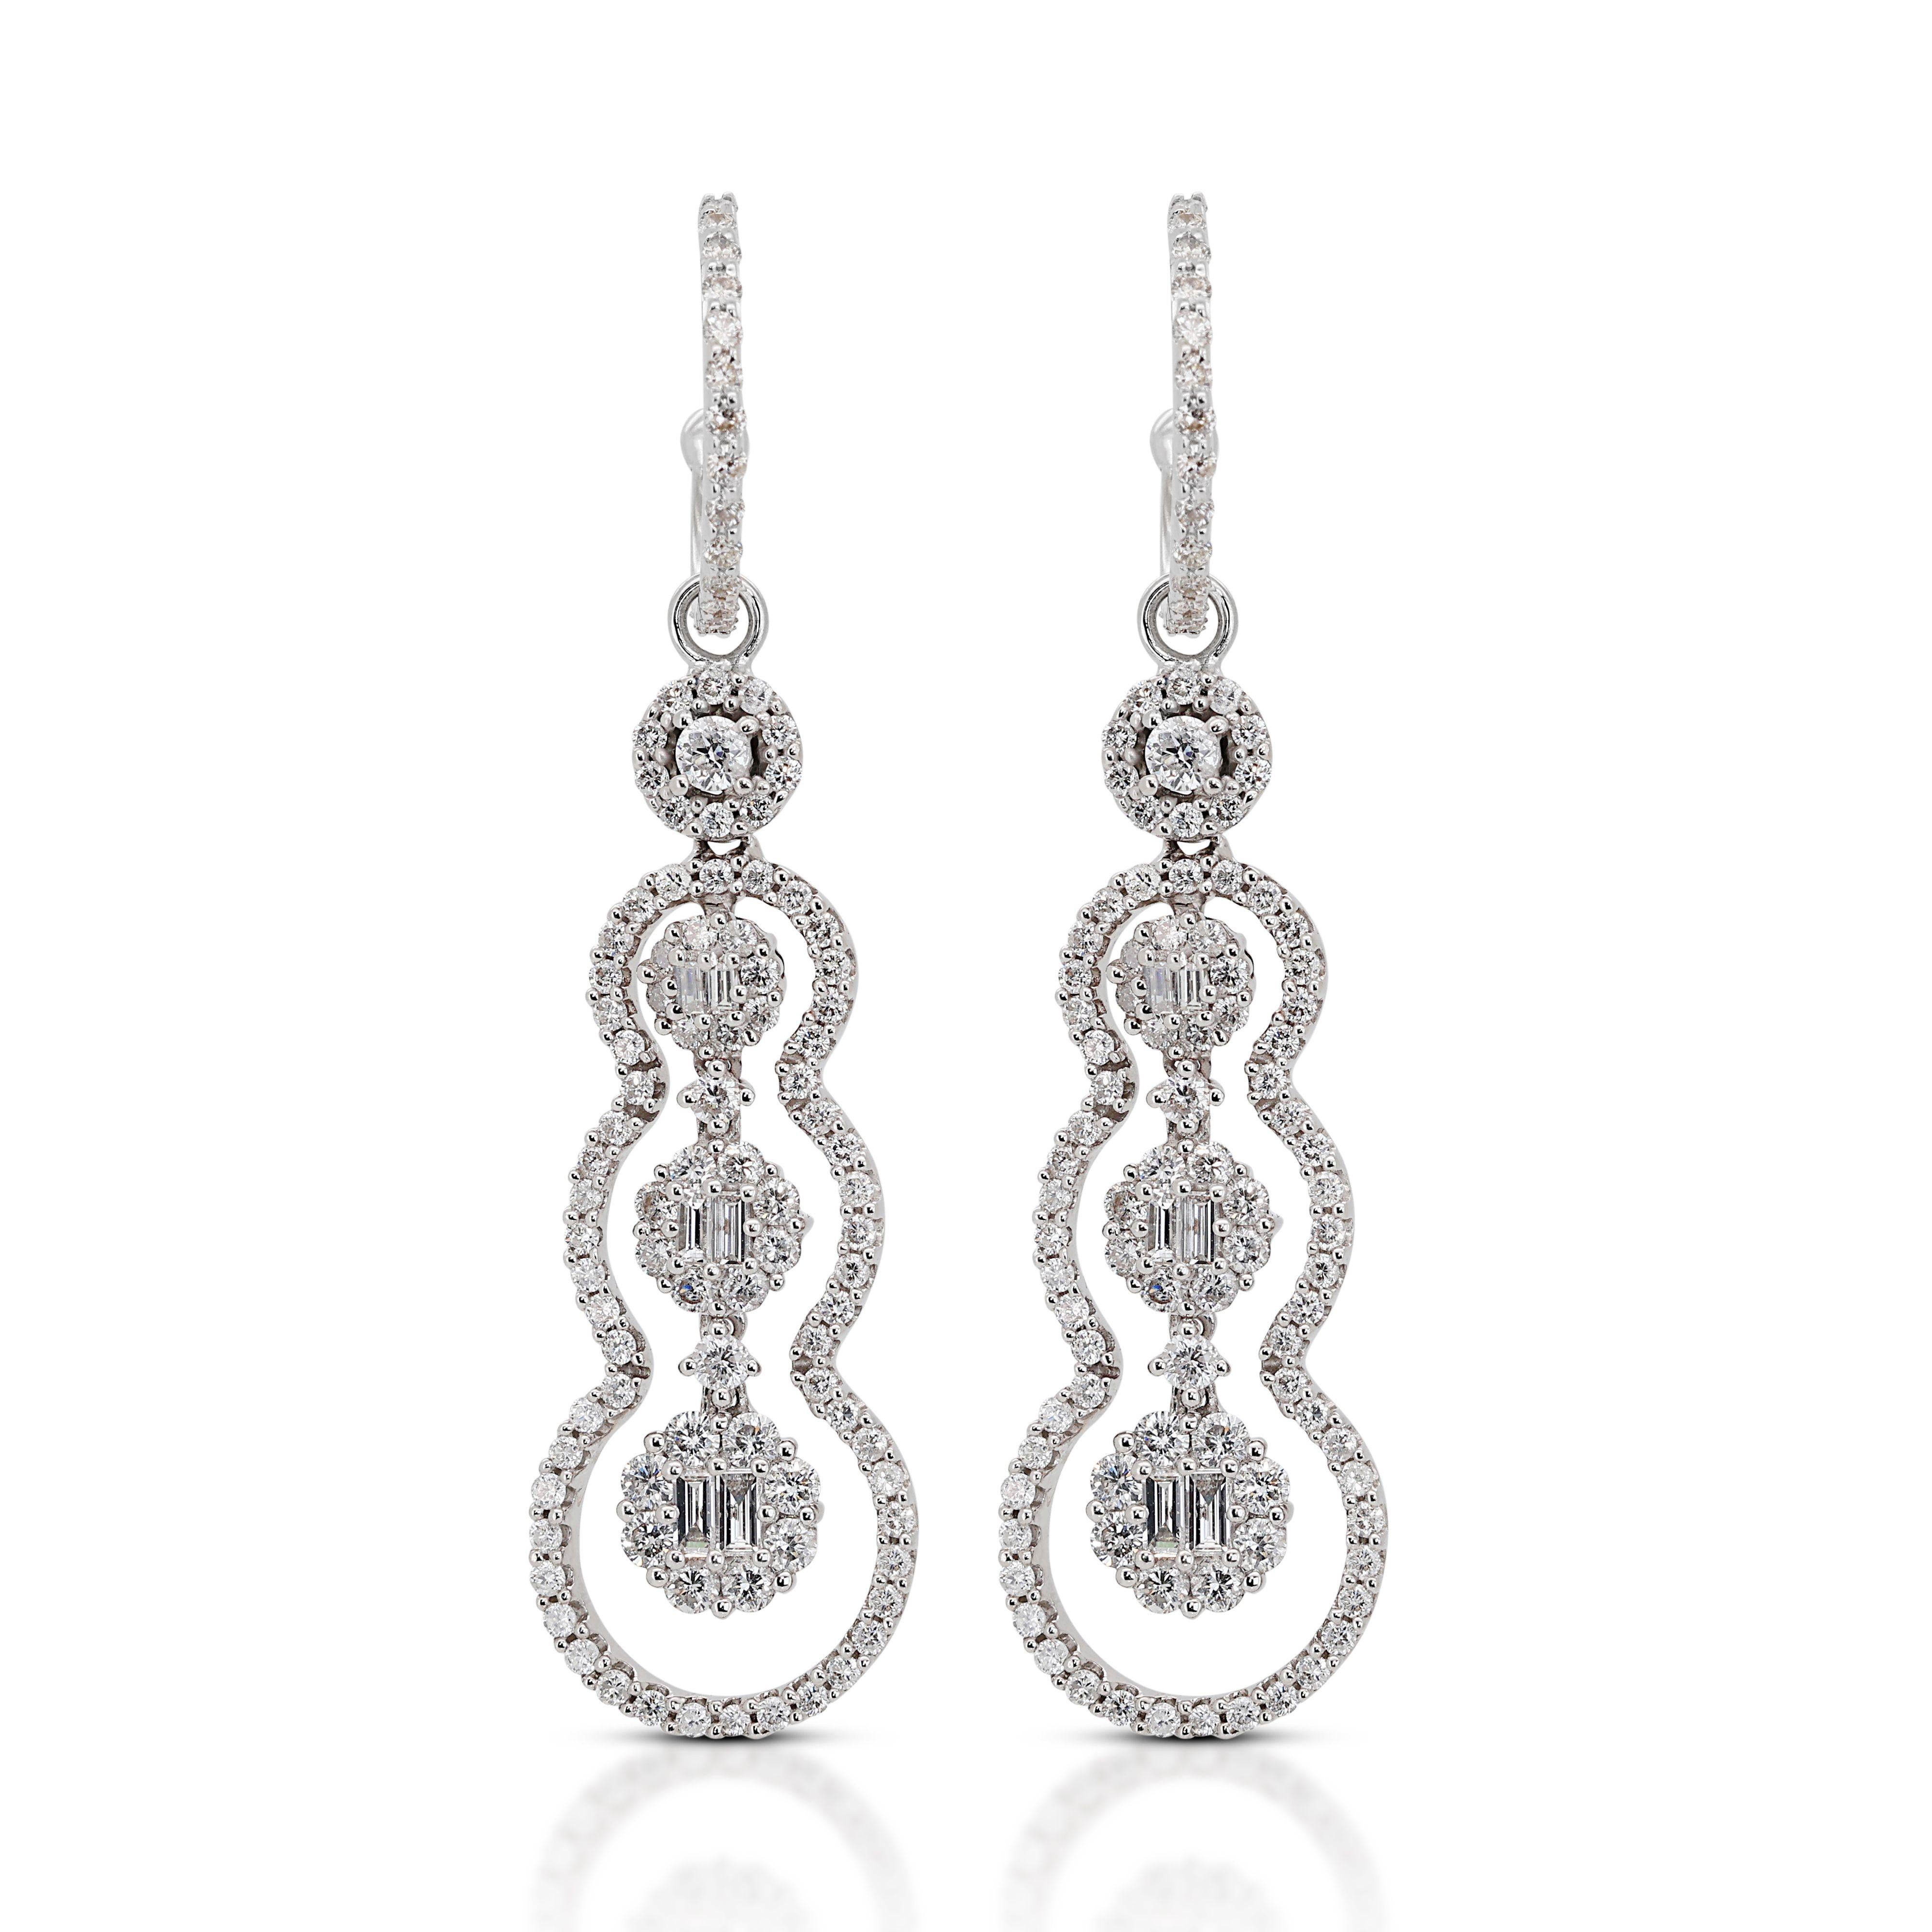 Stylish 3.50ct. Round Brilliant & Baguette Dangling Diamond Earrings For Sale 4